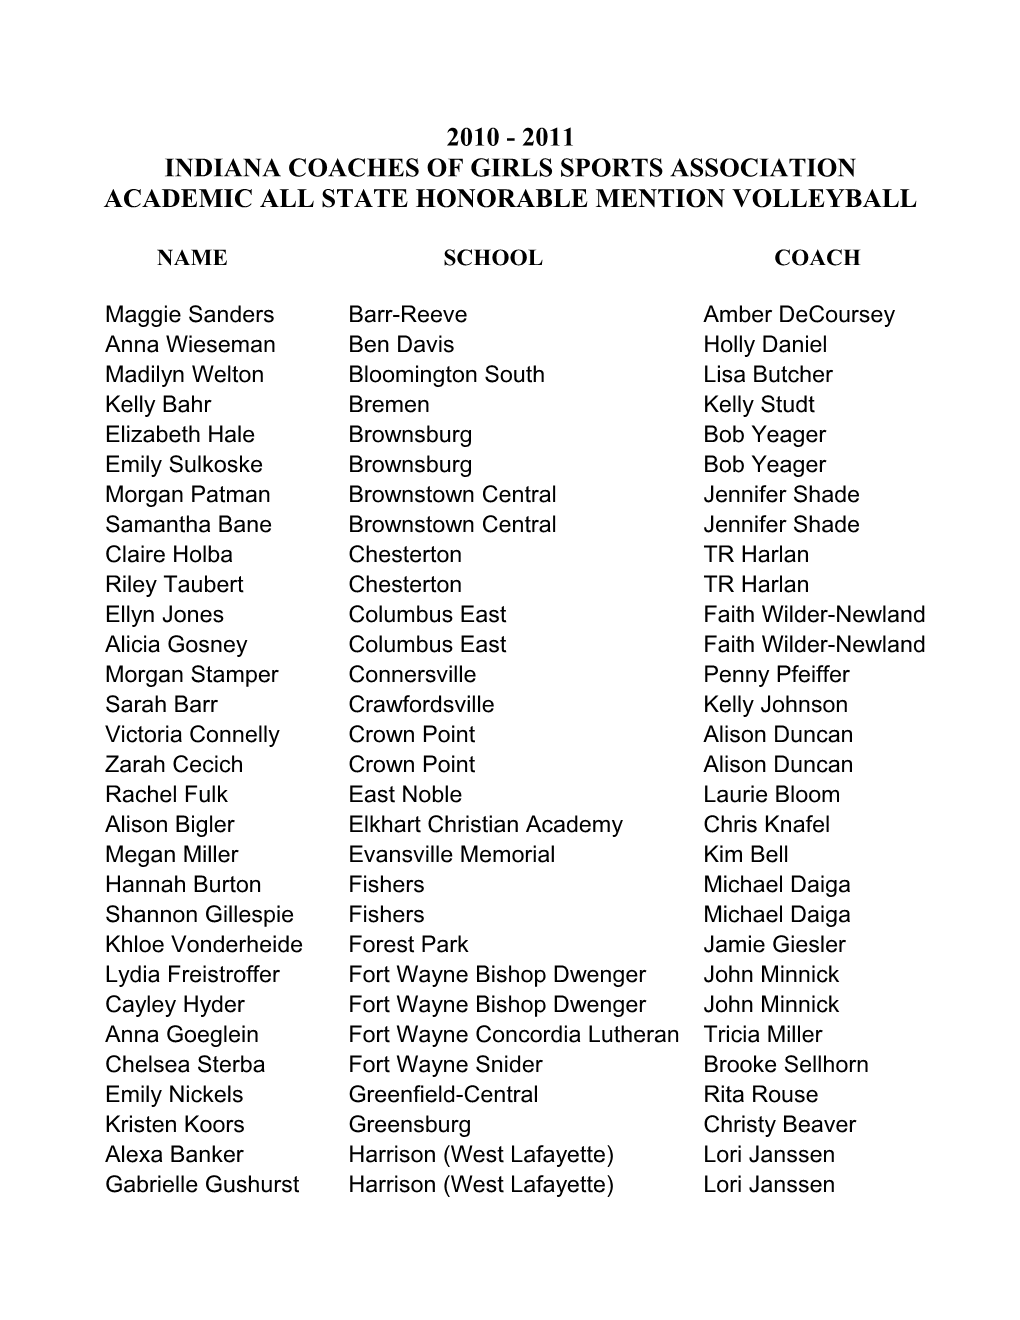 Indiana Coaches of Girlssportsassociationacademicallstate Honorable Mention Volleyball